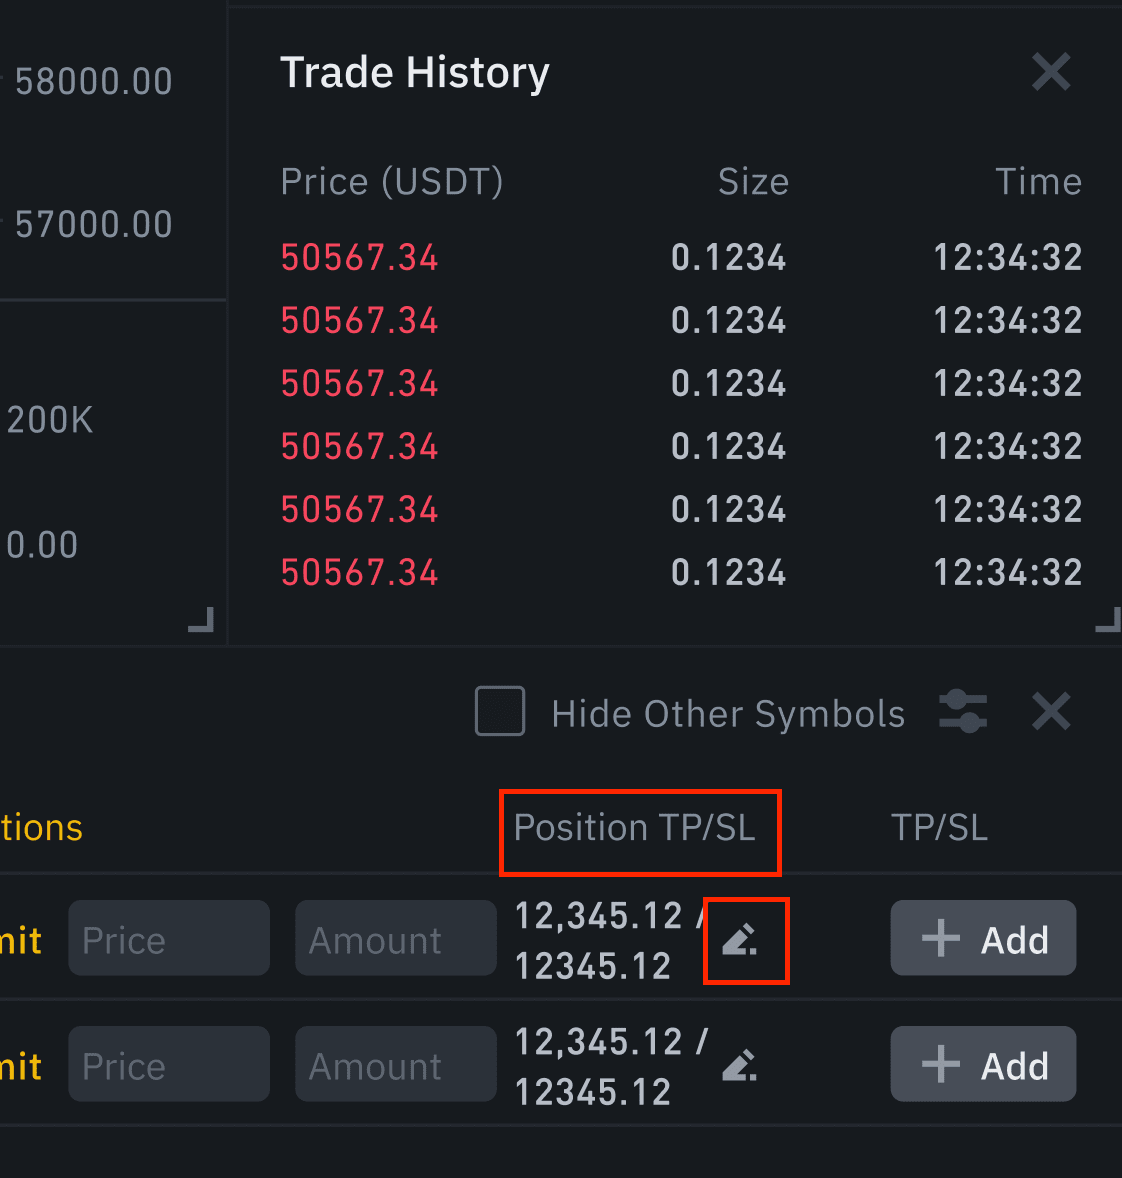 How To Set A Stop Loss On Binance Futures-Guide In Simple Words